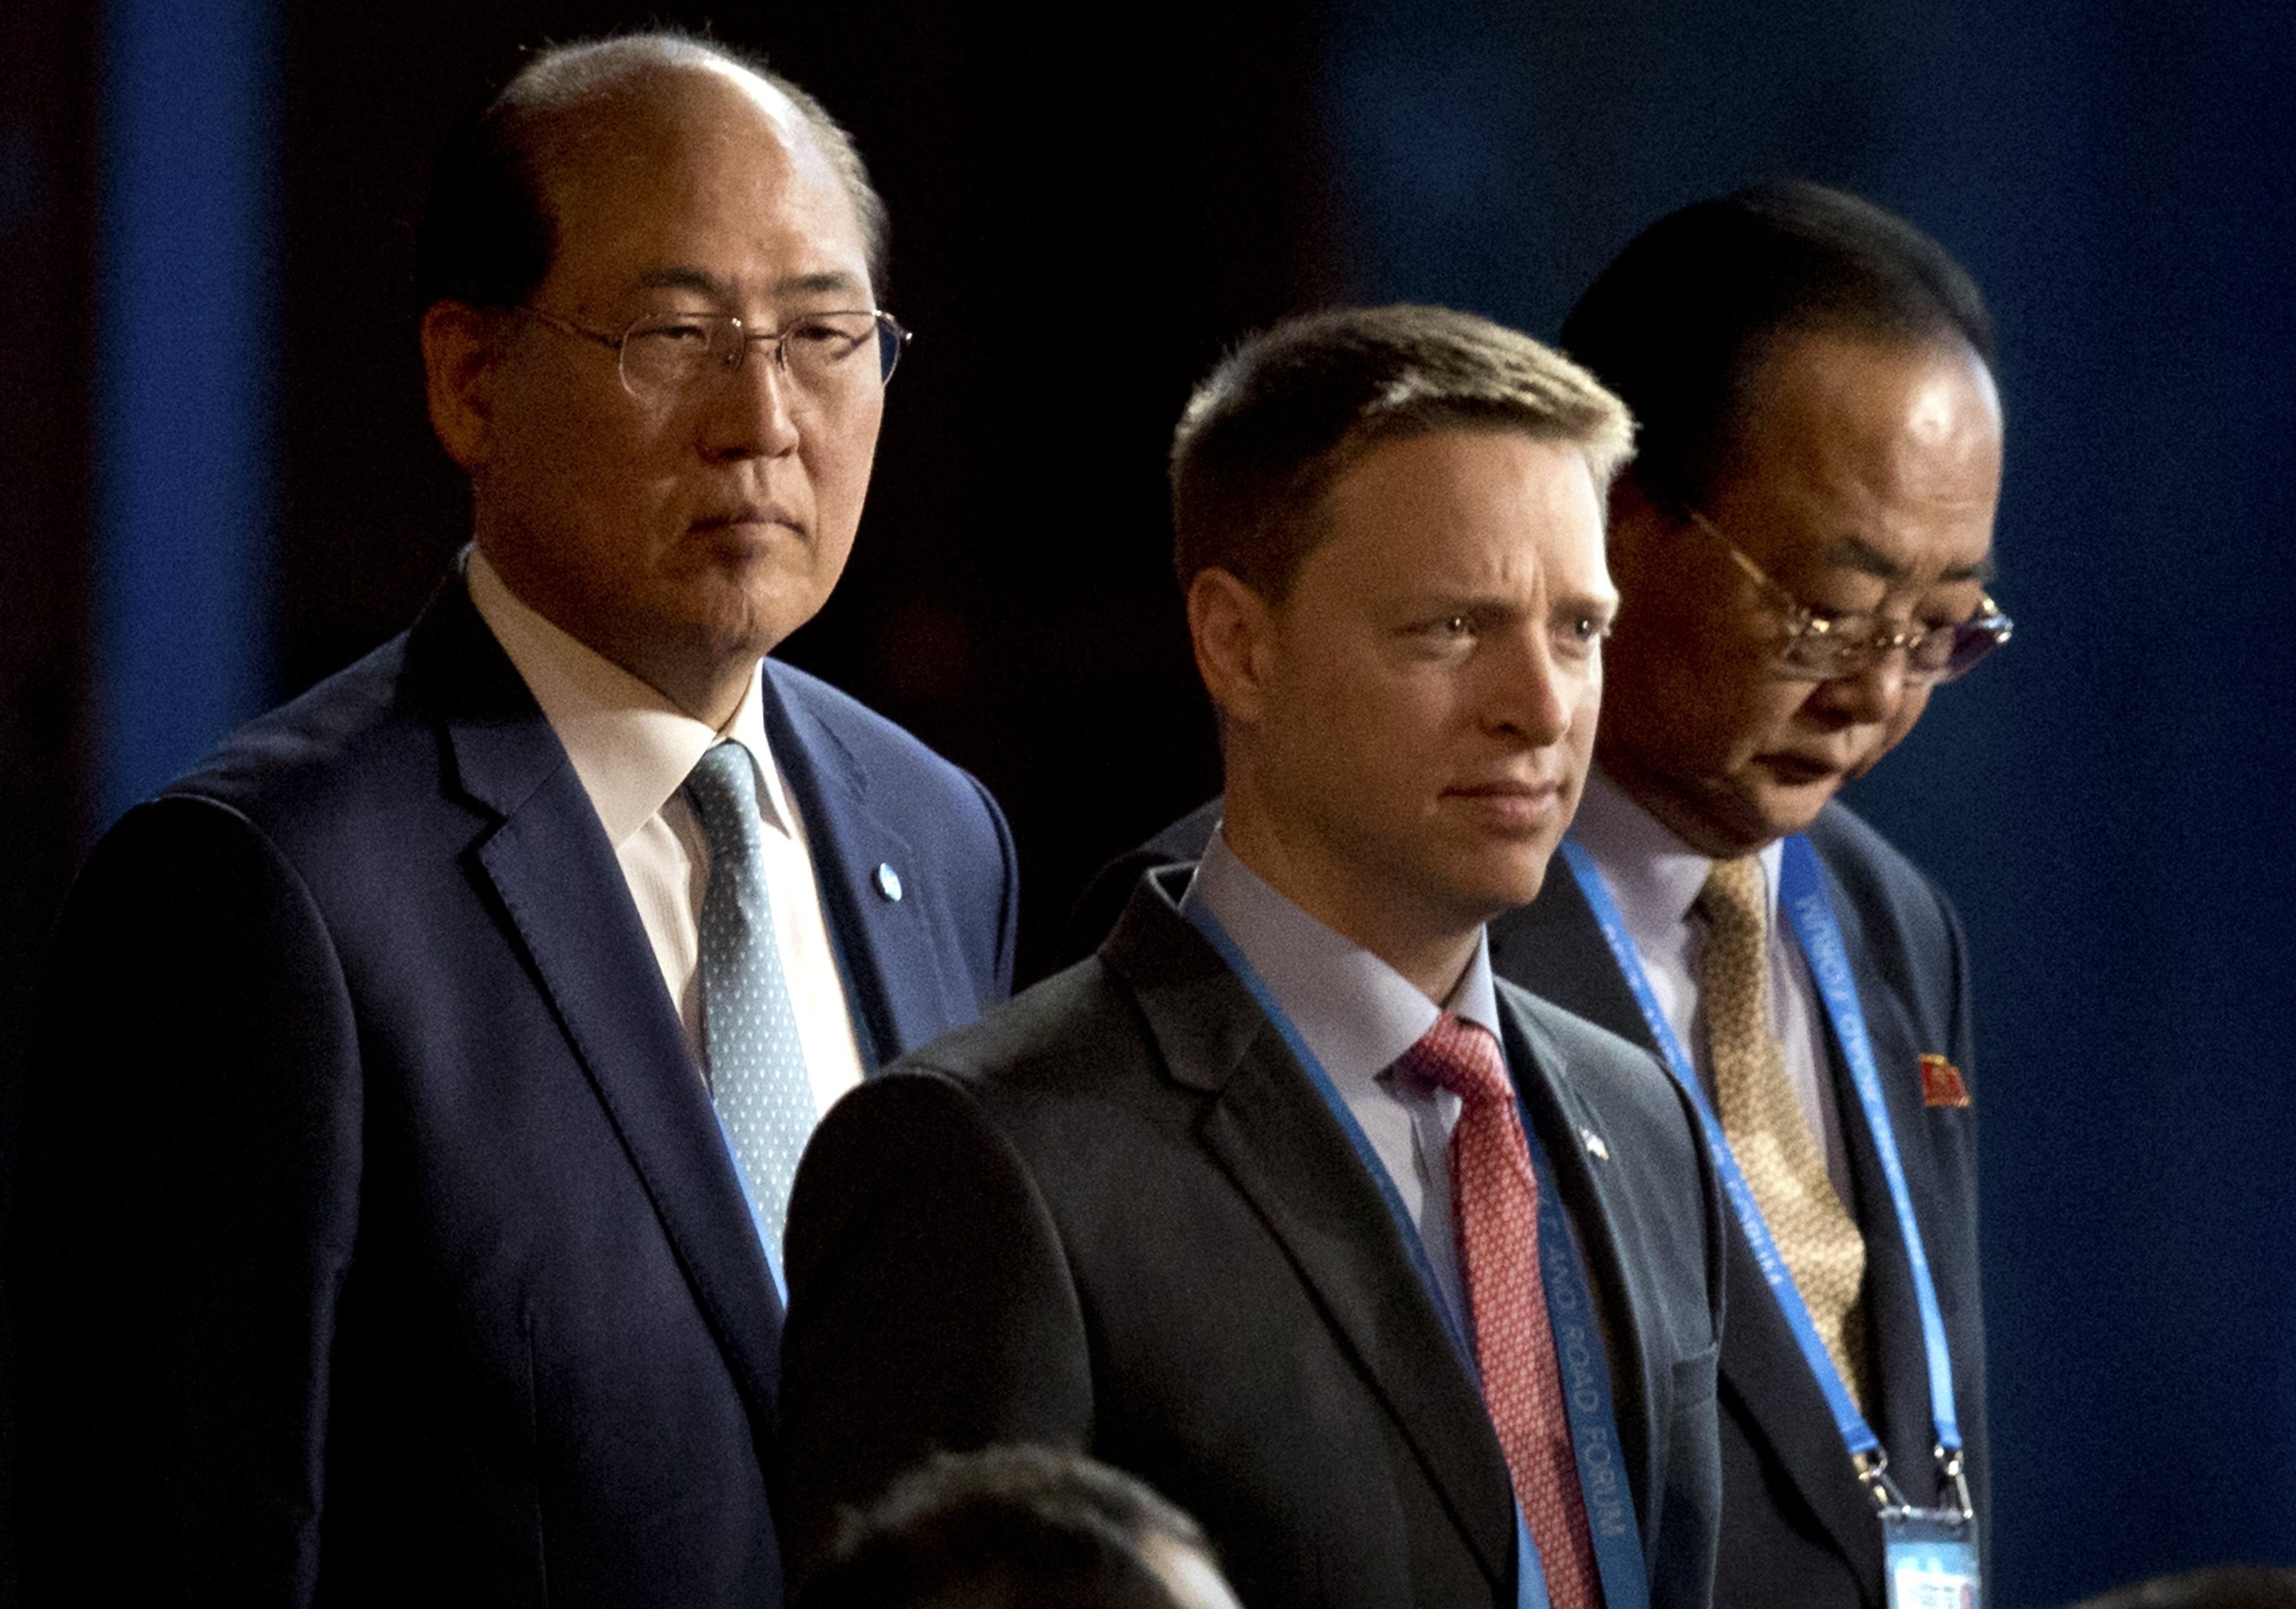 Matt Pottinger (centre), Special Assistant to US President Donald Trump and National Security Council (NSC) Senior Director for East Asia, and Kim Yong Jae (R), North Korea’s minister of external economic relations, arrive for the opening ceremony of the Belt and Road Forum (BRF) at the China National Convention Centre (CNCC) in Beijing, China, 14 May 2017. Photo: EPA